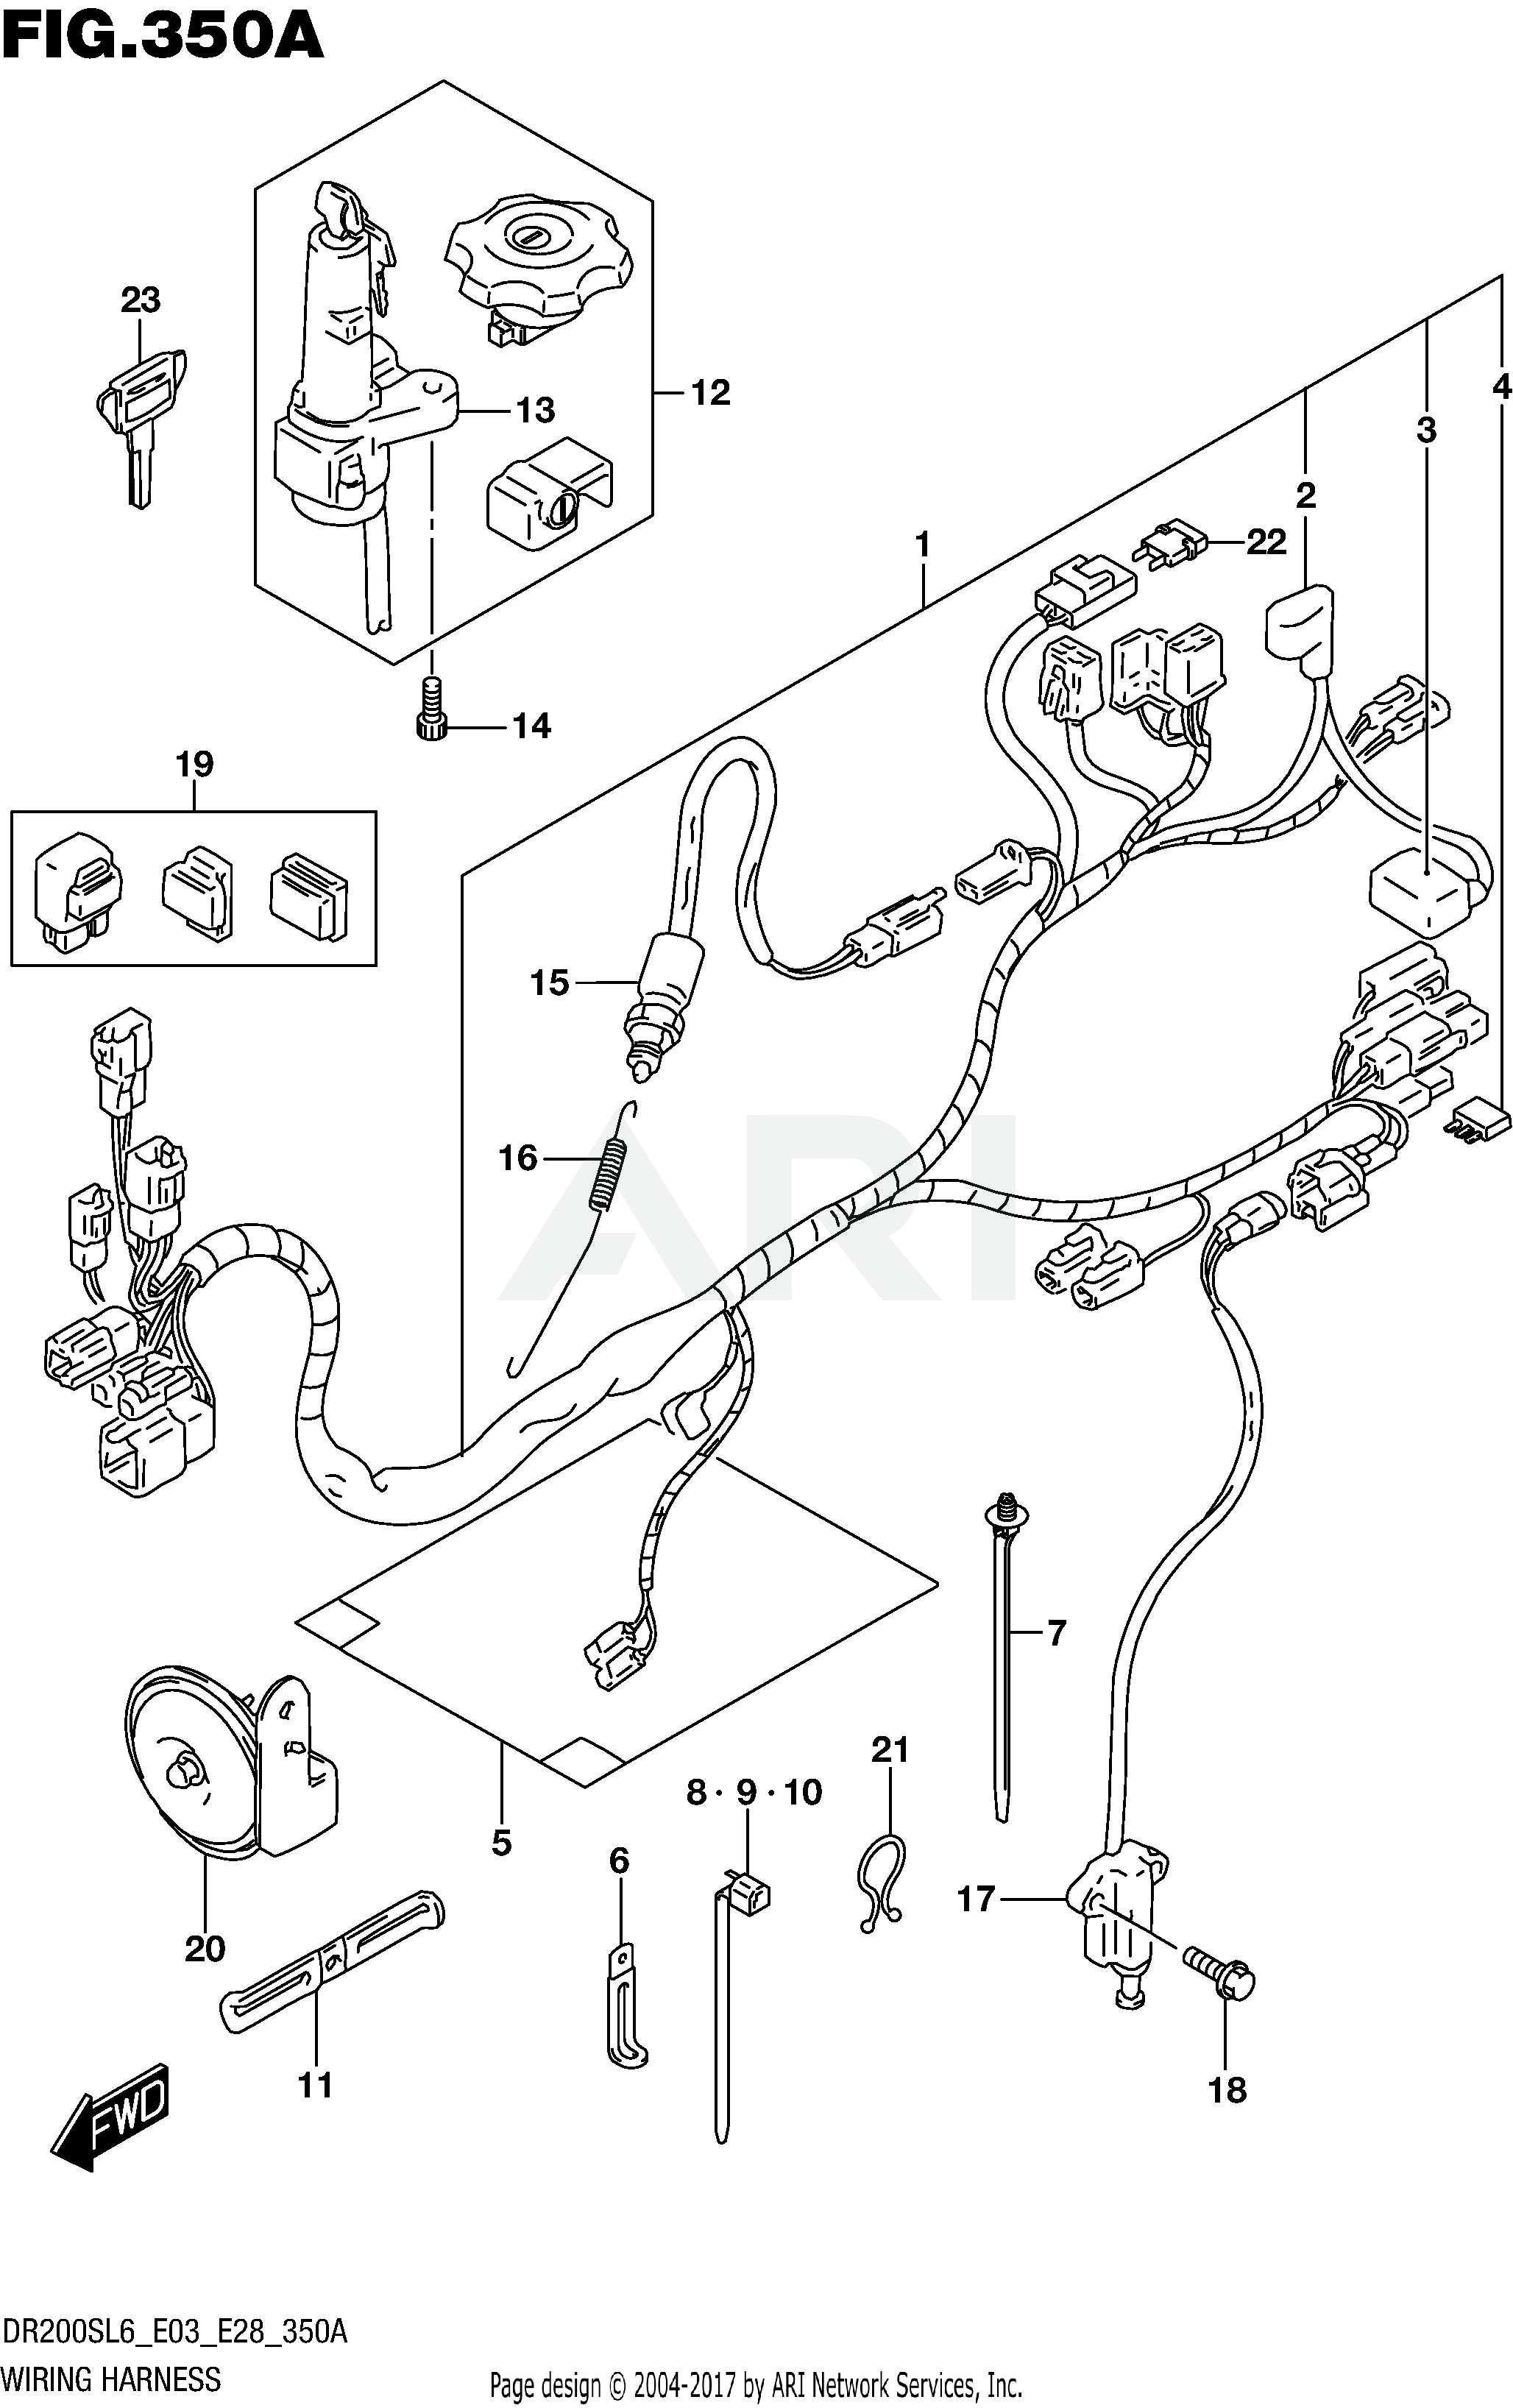 WIRING HARNESS (DR200SEL3 E03)